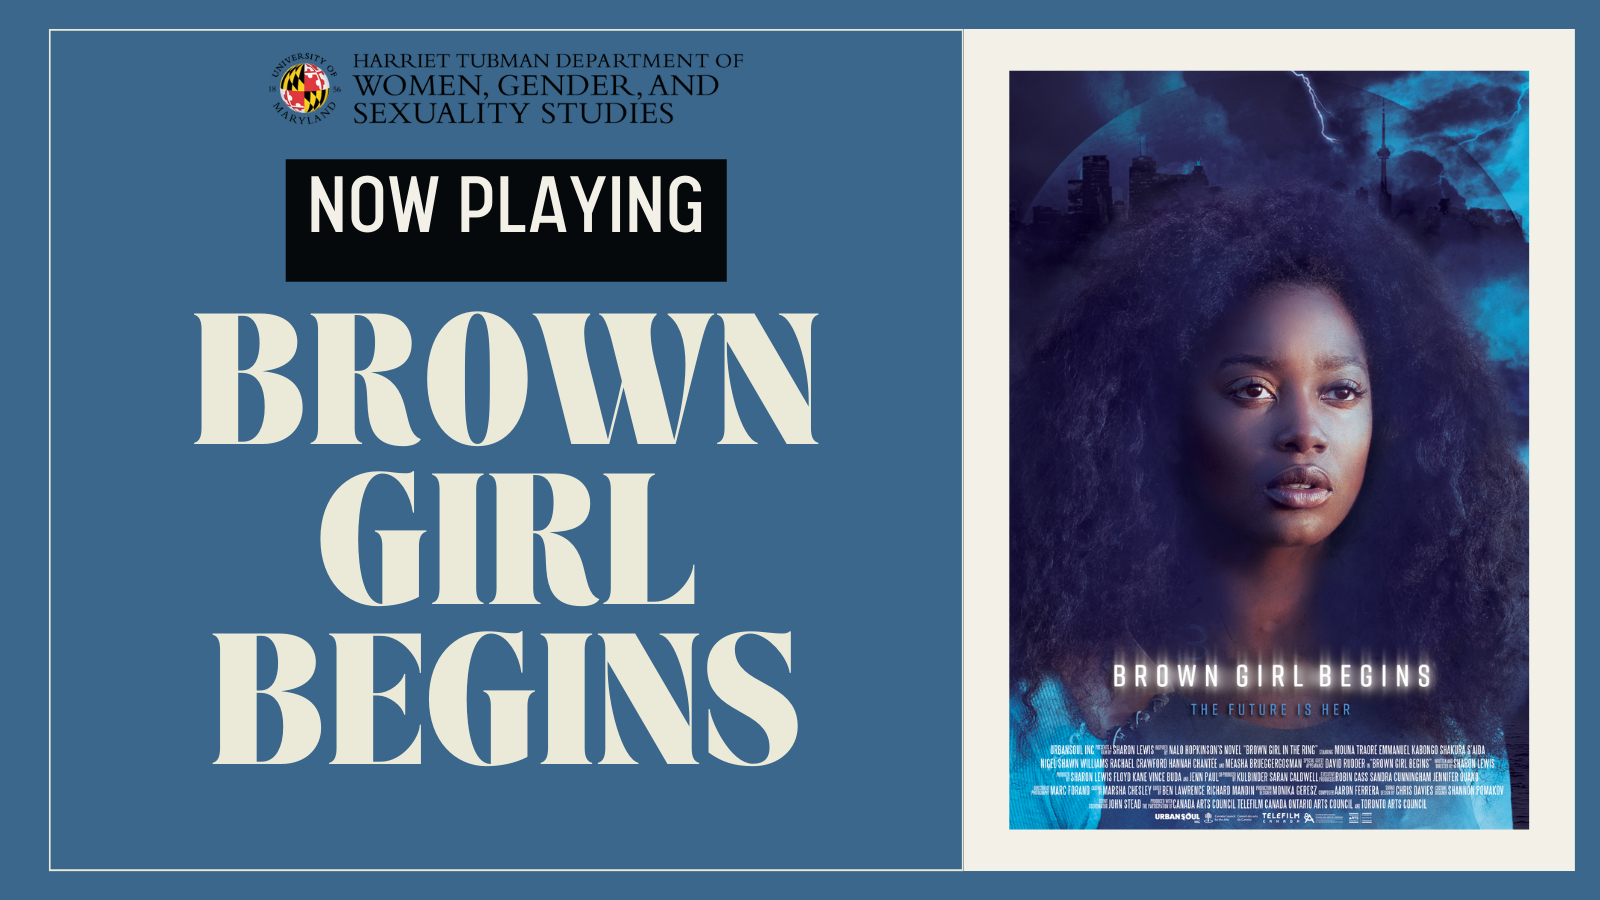 The title Brown Girl Begins next to an image of the movie poster. A black woman stares off into the distance against a swirling blue abstract background